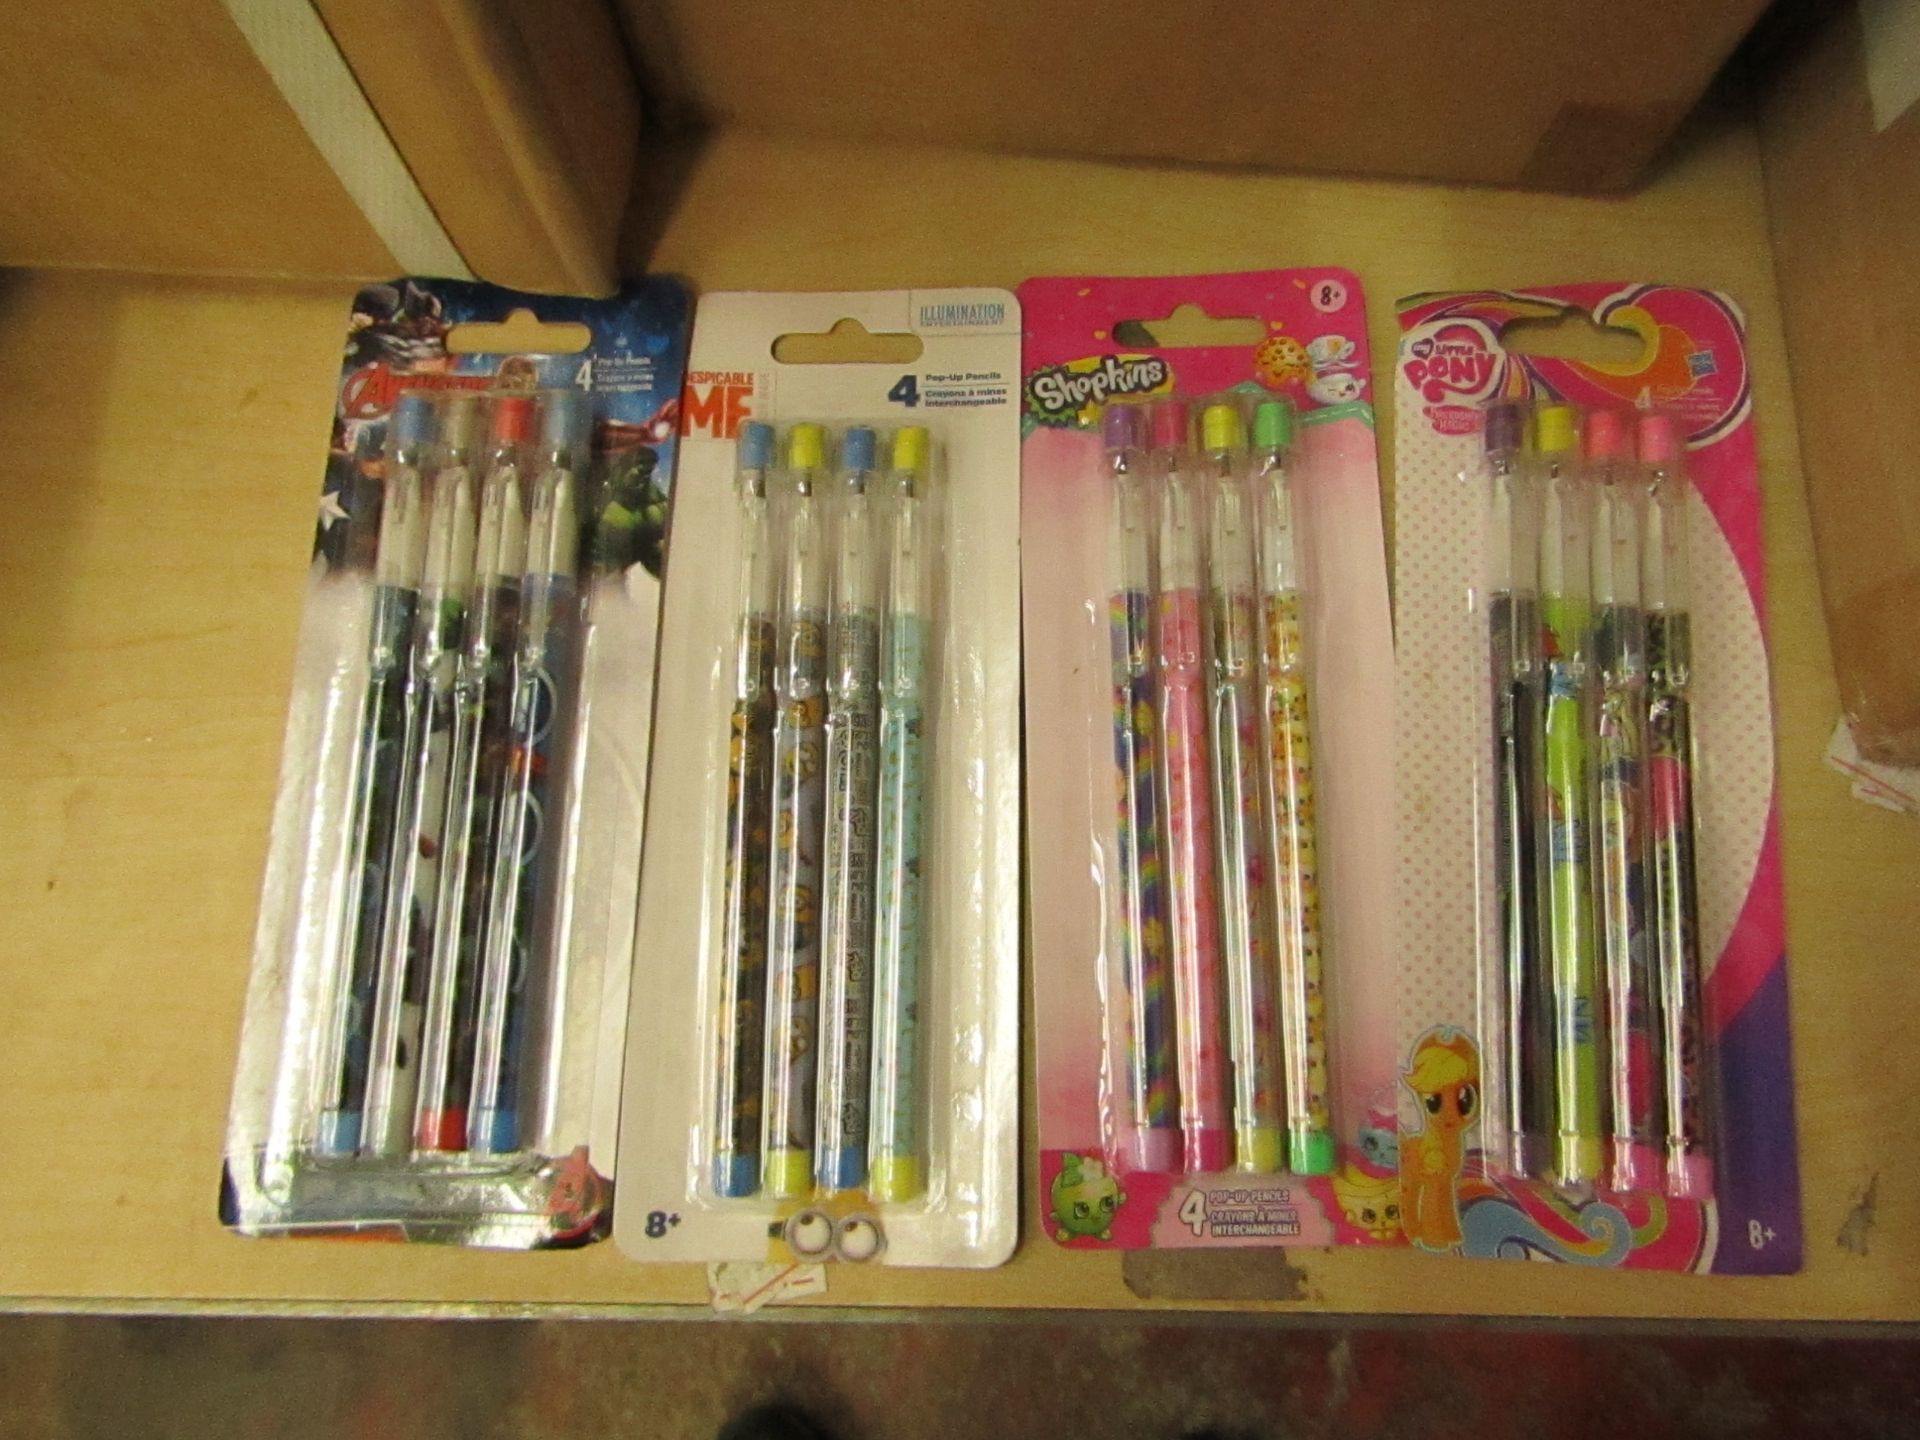 4 x packs of Pop Up Pencils being 1 x Avengers 1 x My Little Pony 1 x Shopkins 1 x Despicable Me new